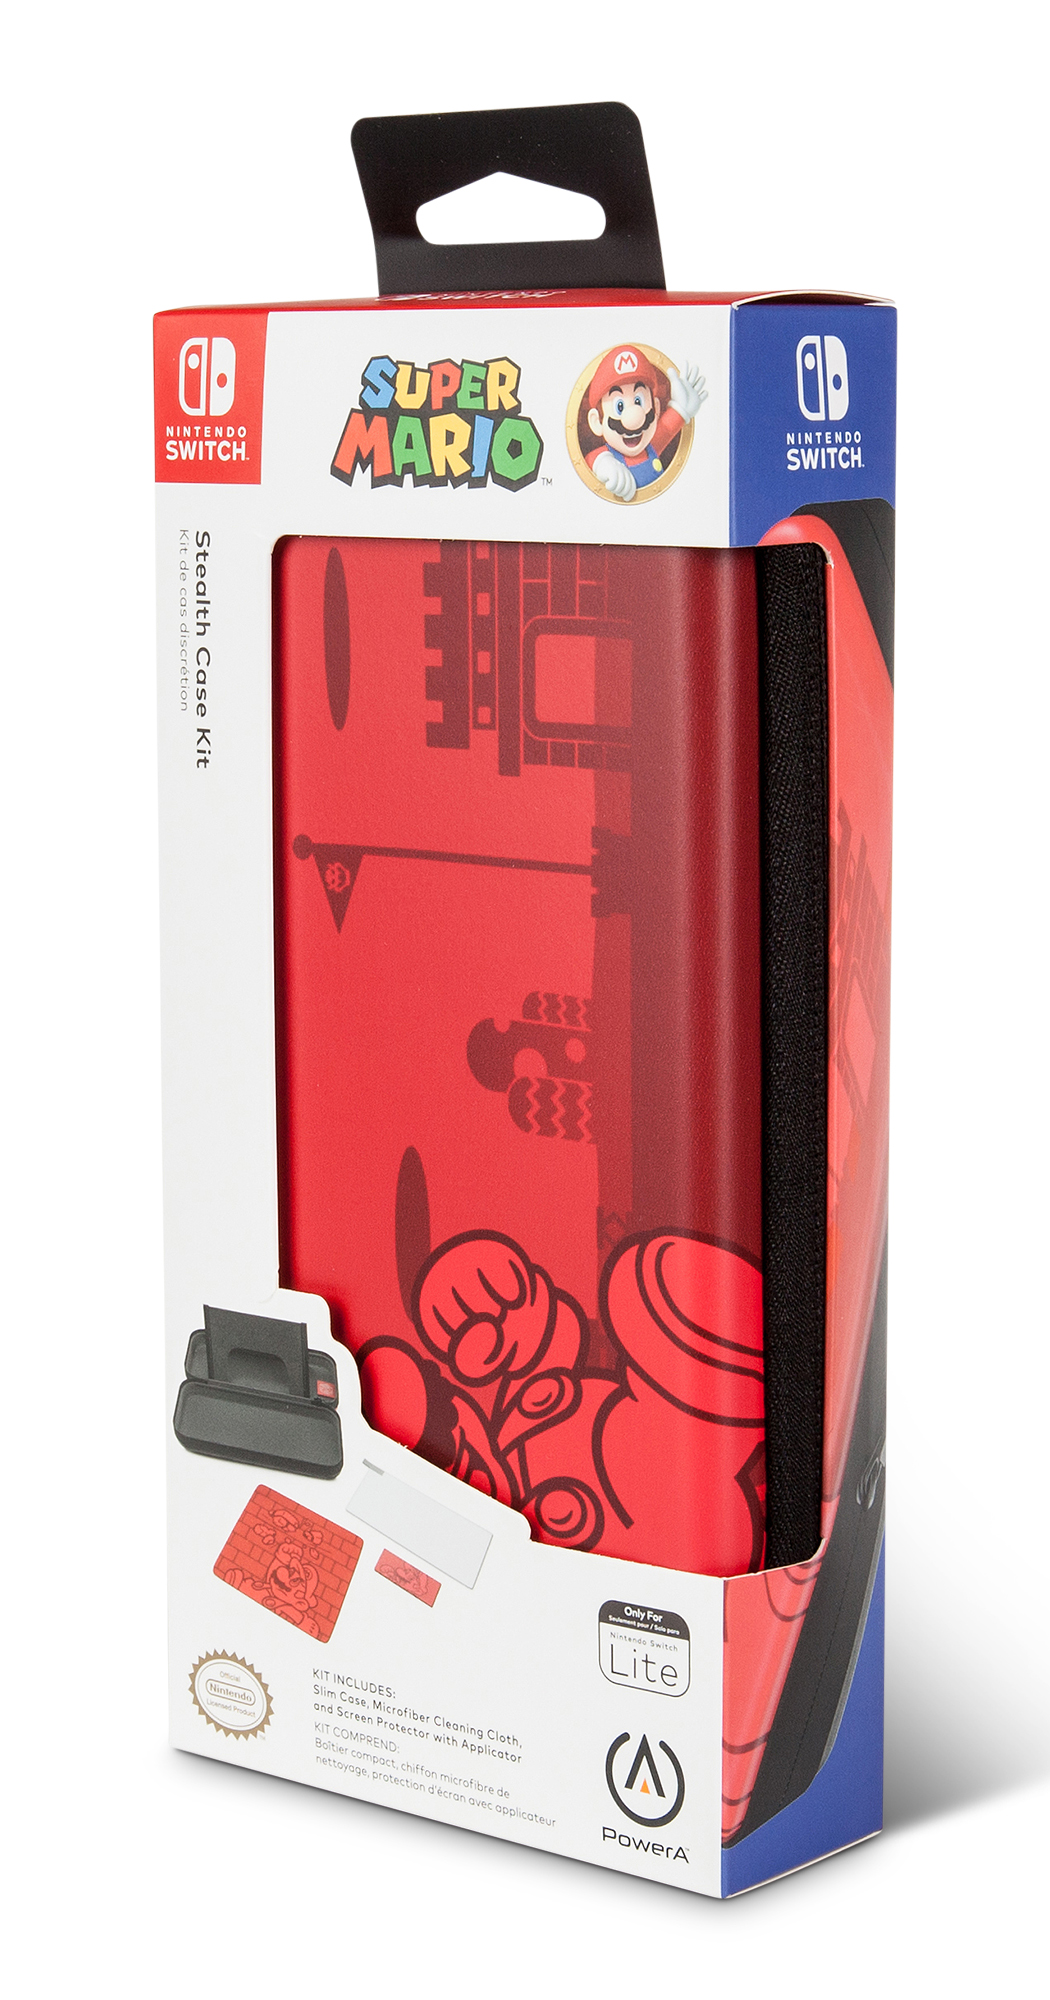 stealth nintendo switch lite case & accessory kit